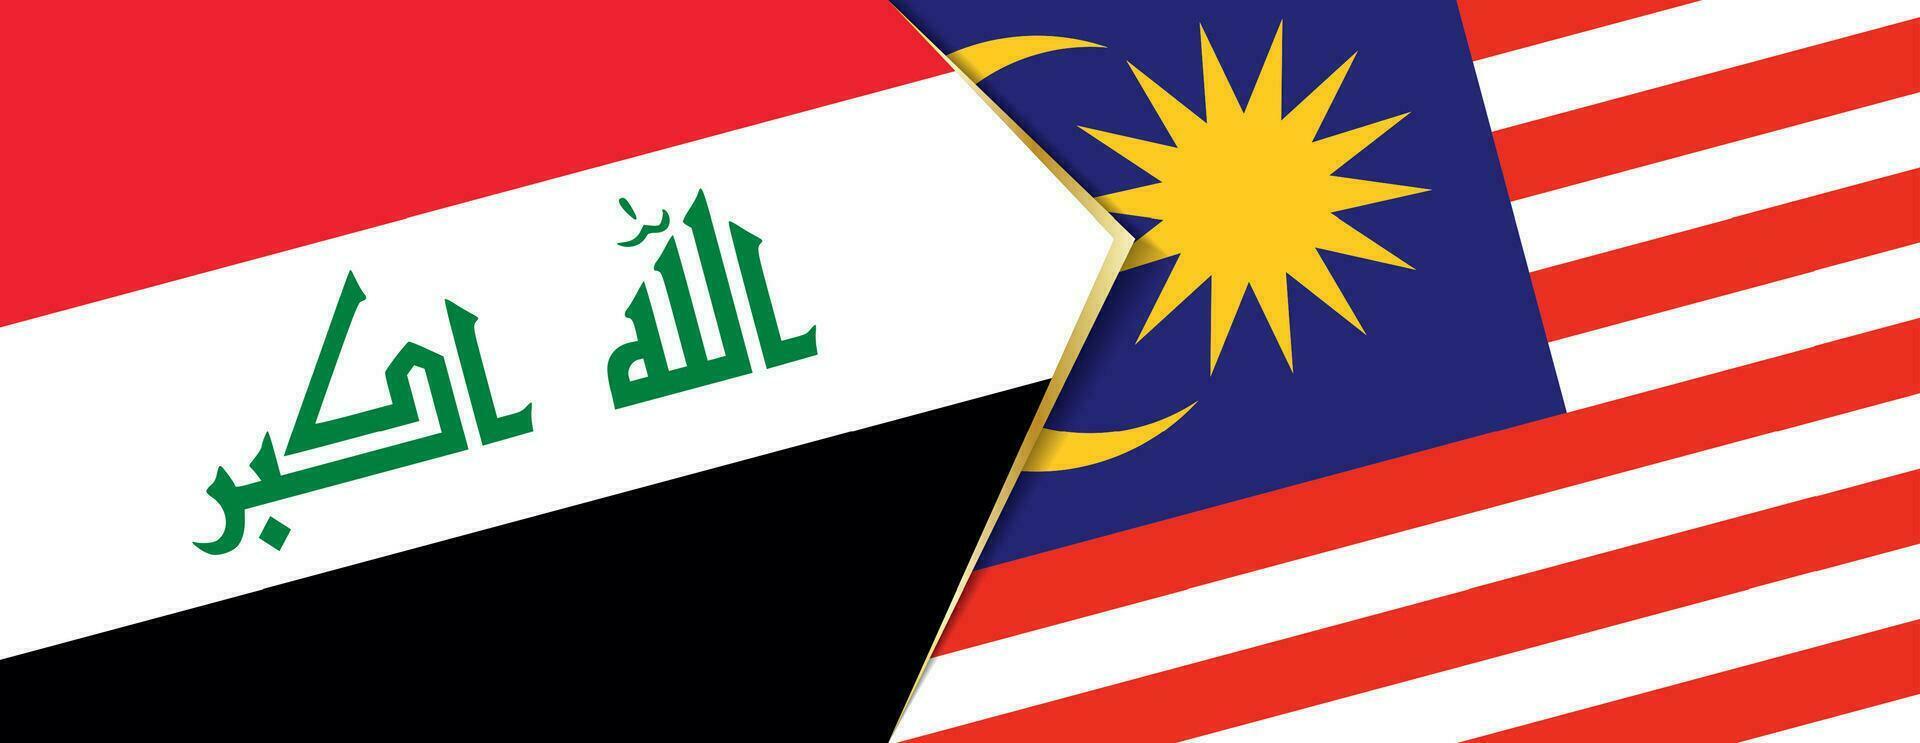 Iraq and Malaysia flags, two vector flags.